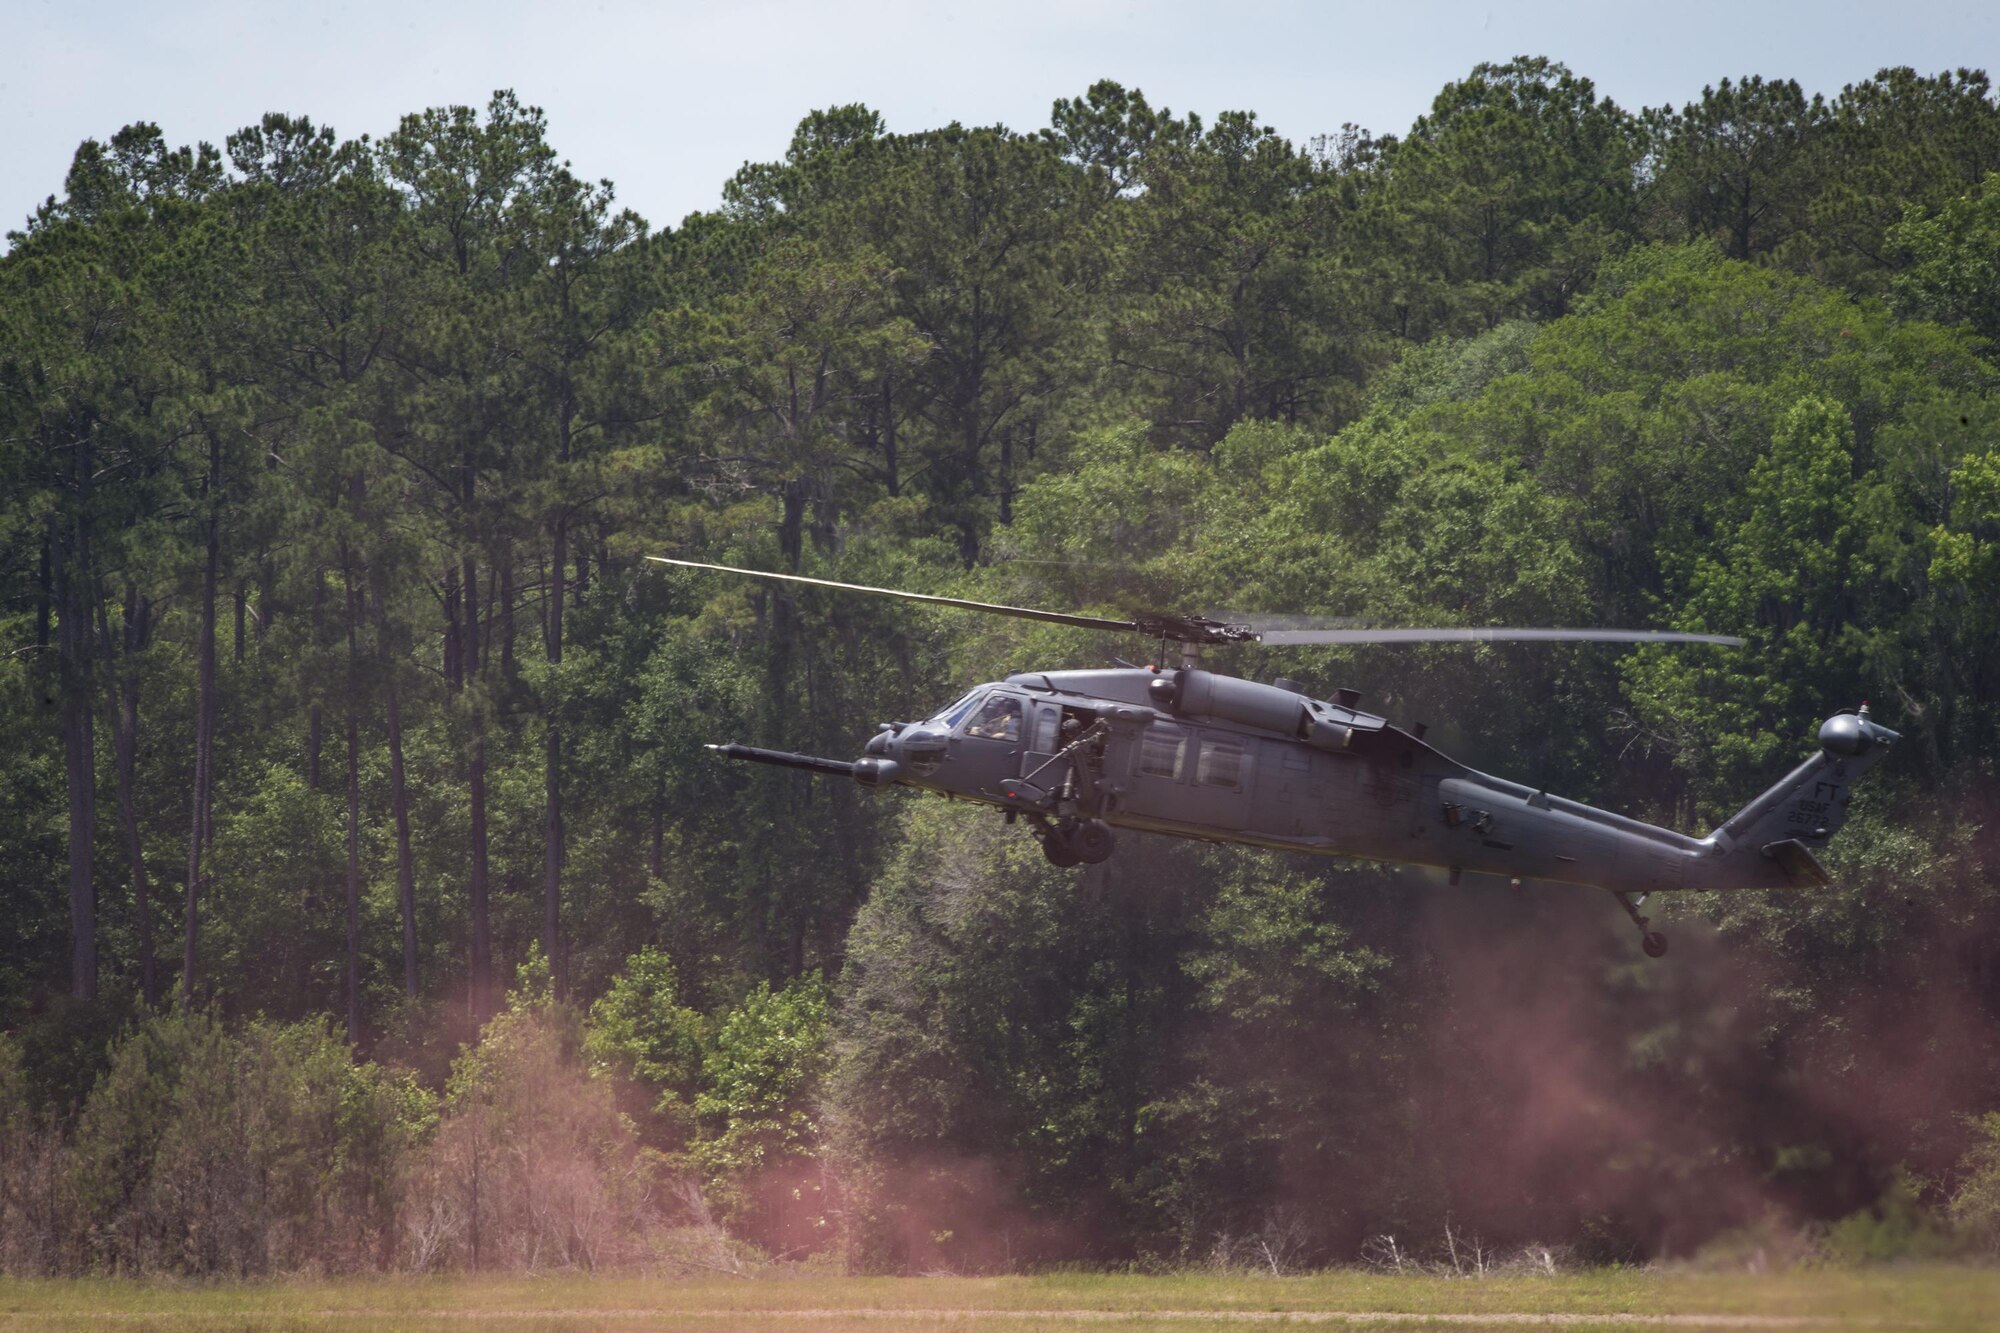 An HH-60G Pave Hawk descends to land on Grand Bay Bombing and Gunnery Range at Moody Air Force Base, Ga., May 19, 2016. The Pave Hawk participated in training simulating different combat situations to synchronize efforts between a variety of Air Combat Command airframes. (U.S. Air Force photo by Airman Daniel Snider/Released)